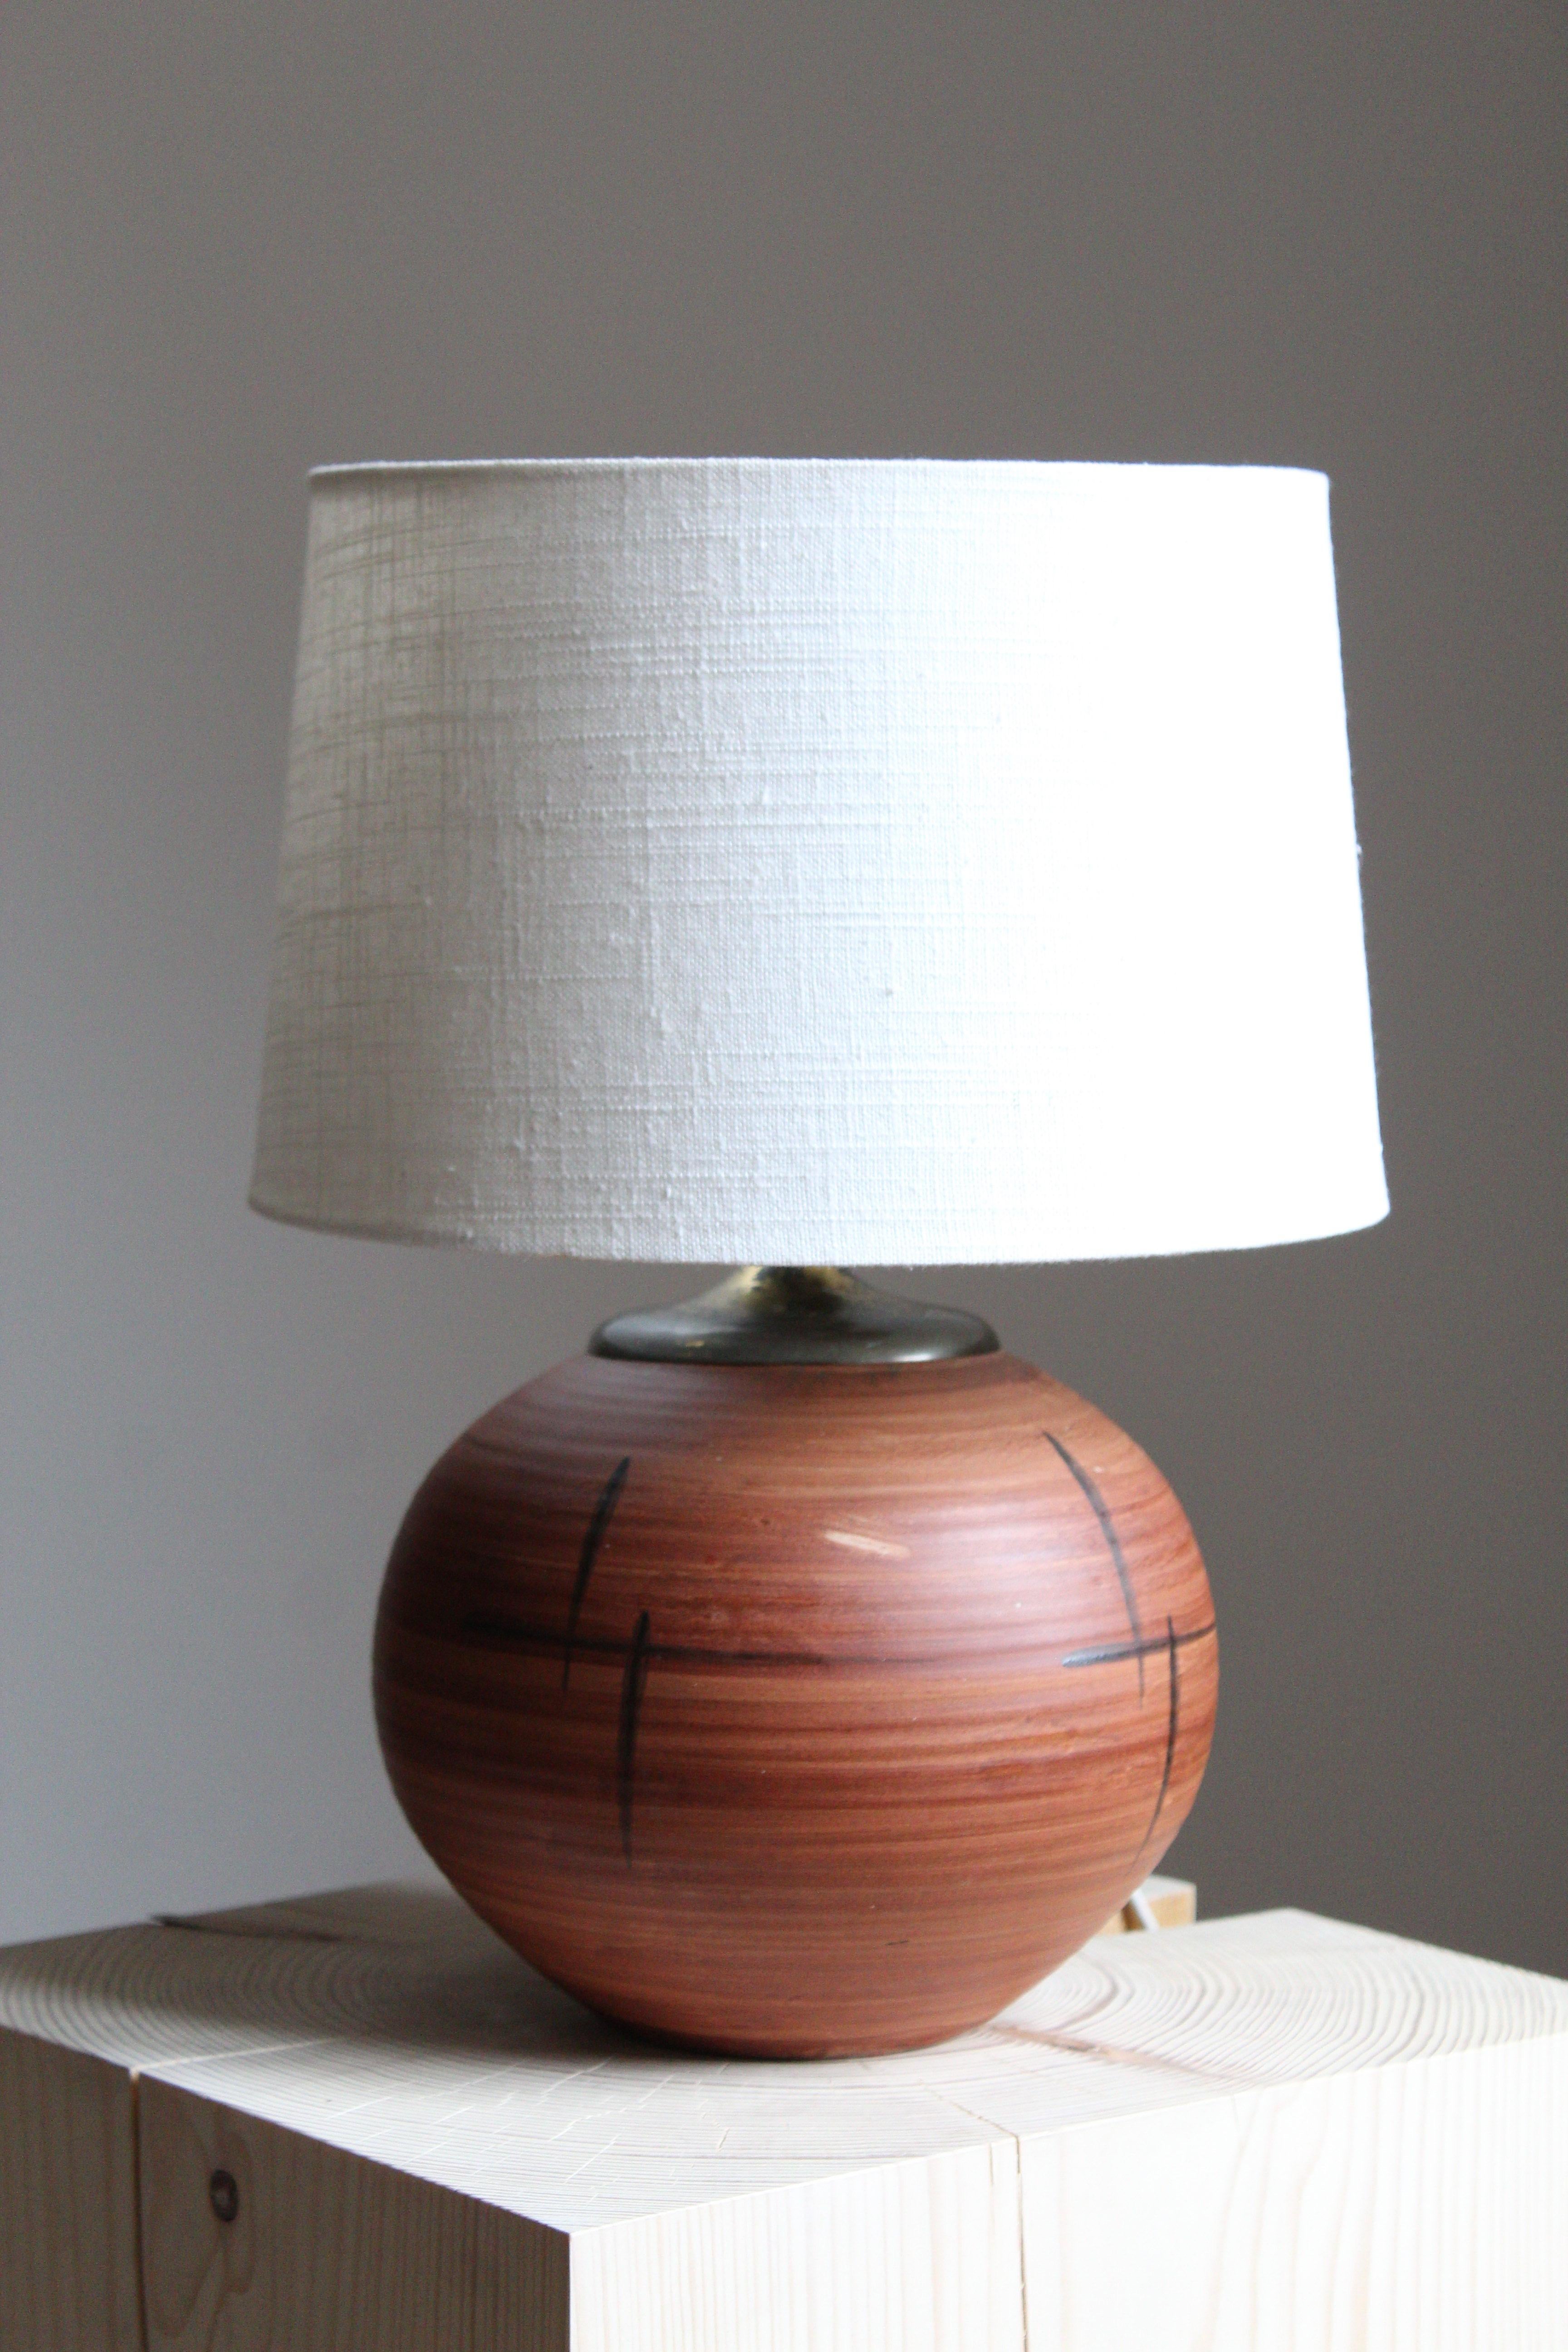 A table lamp by iconic Swedish ceramic firm Ekeby. In glazed and hand-painted ceramic. Marked. Sold without lampshade.

Other designers of the period include Axel Salto, Carl Harry Stålhane, Berndt Friberg, Lisa Larsson, and Wilhelm Kåge.